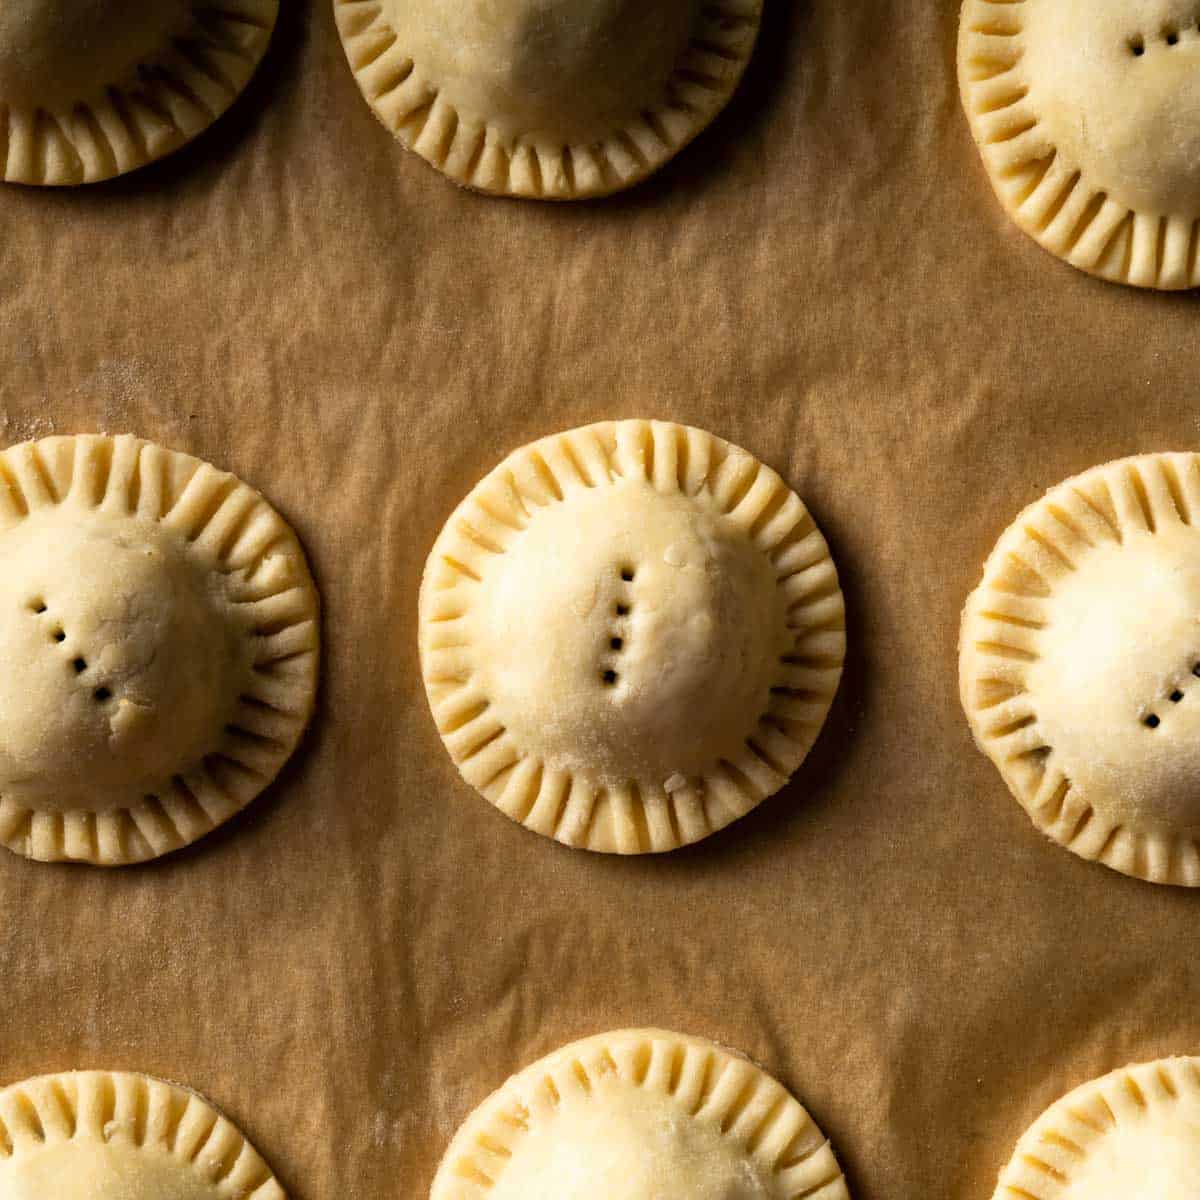 Rows of unbaked mushroom pies on a sheet of brown parchment paper